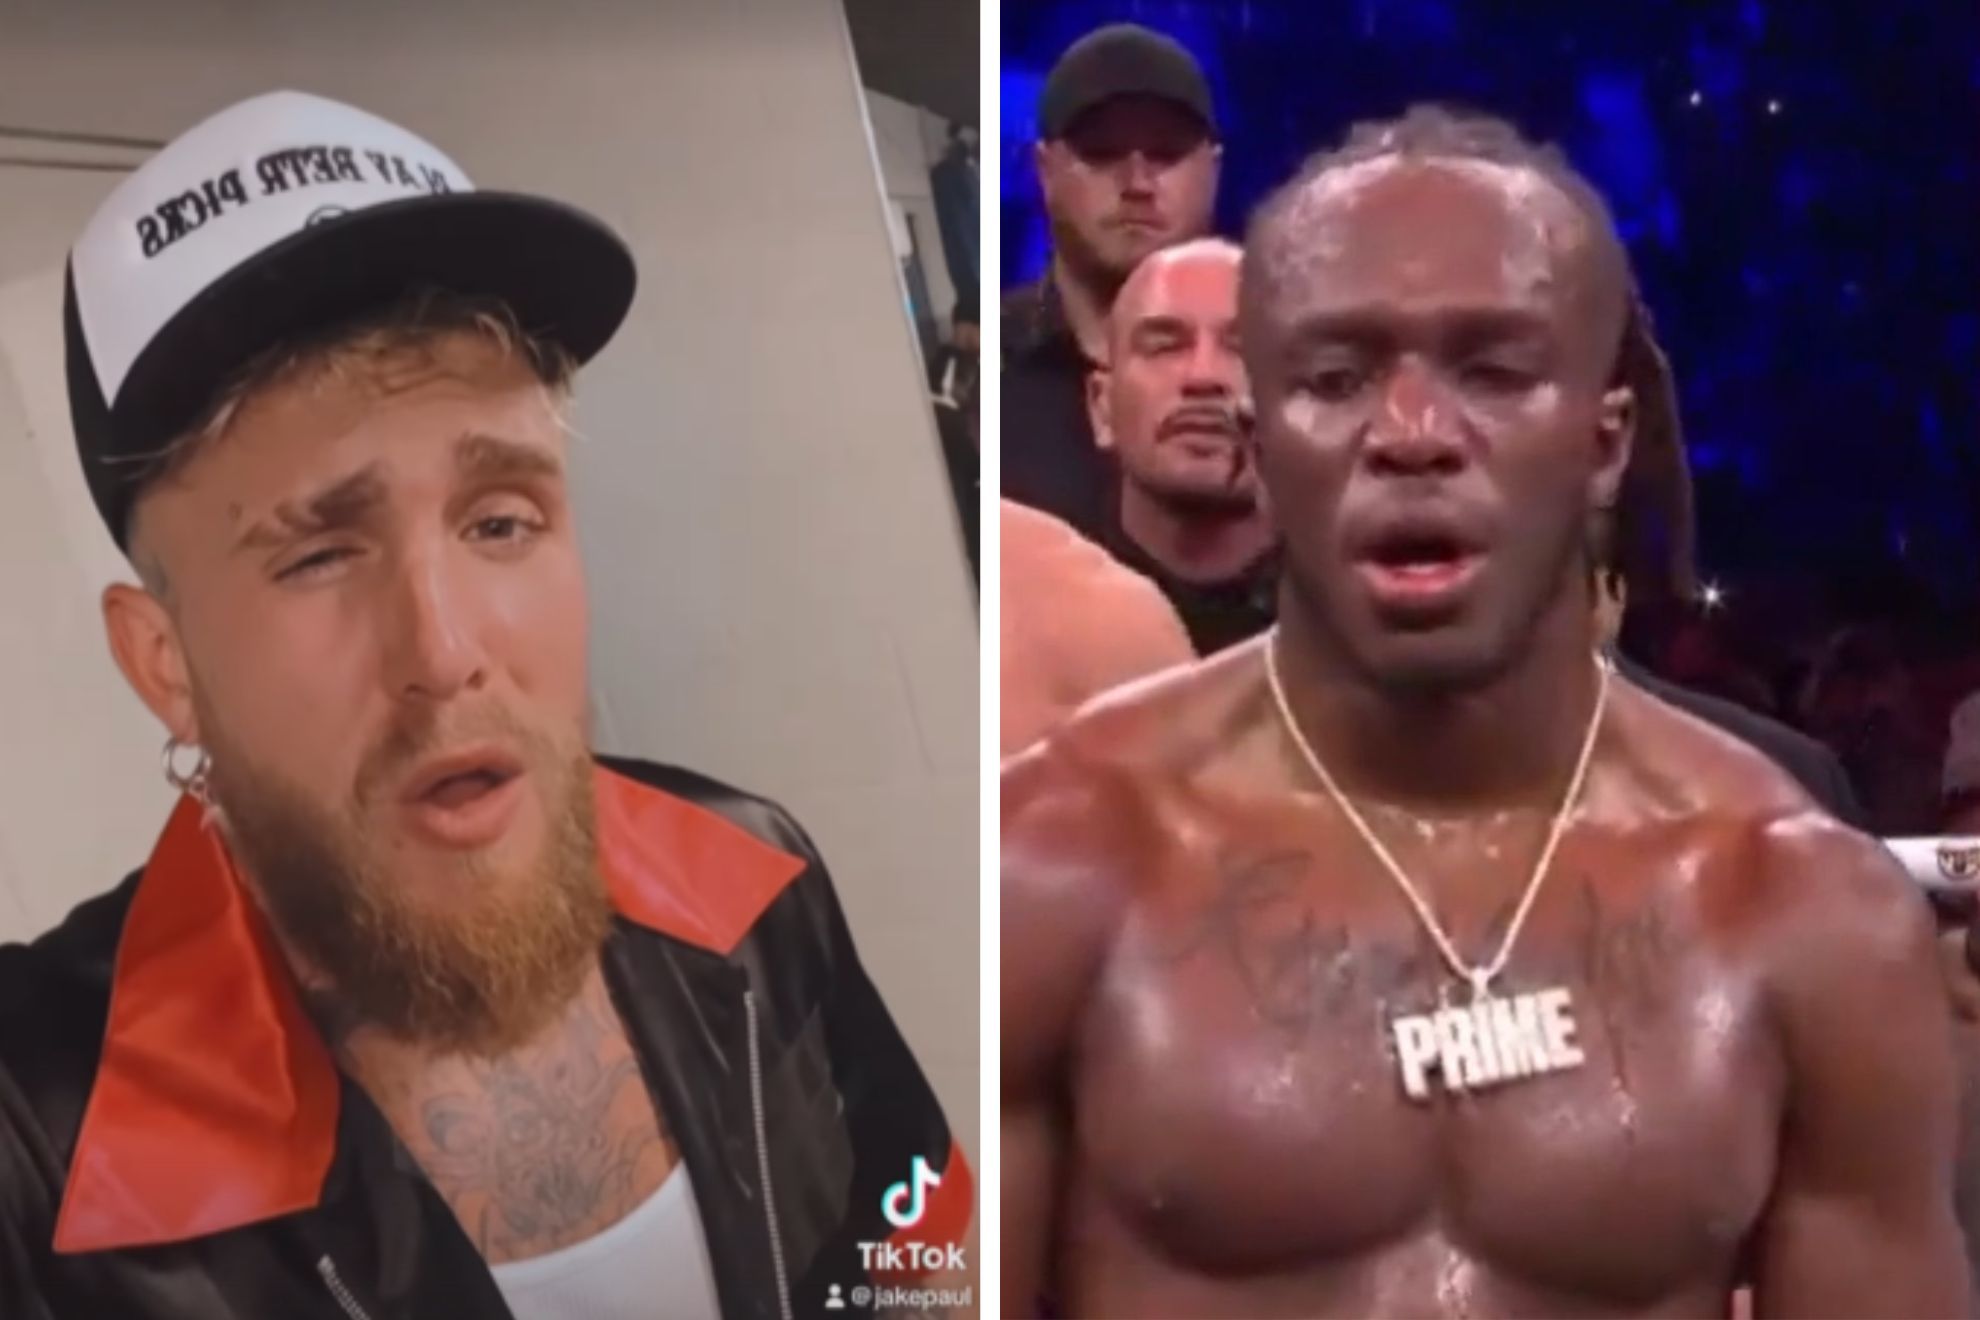 Jake Paul sides with Tommy Fury and mocks KSI over robbery claims